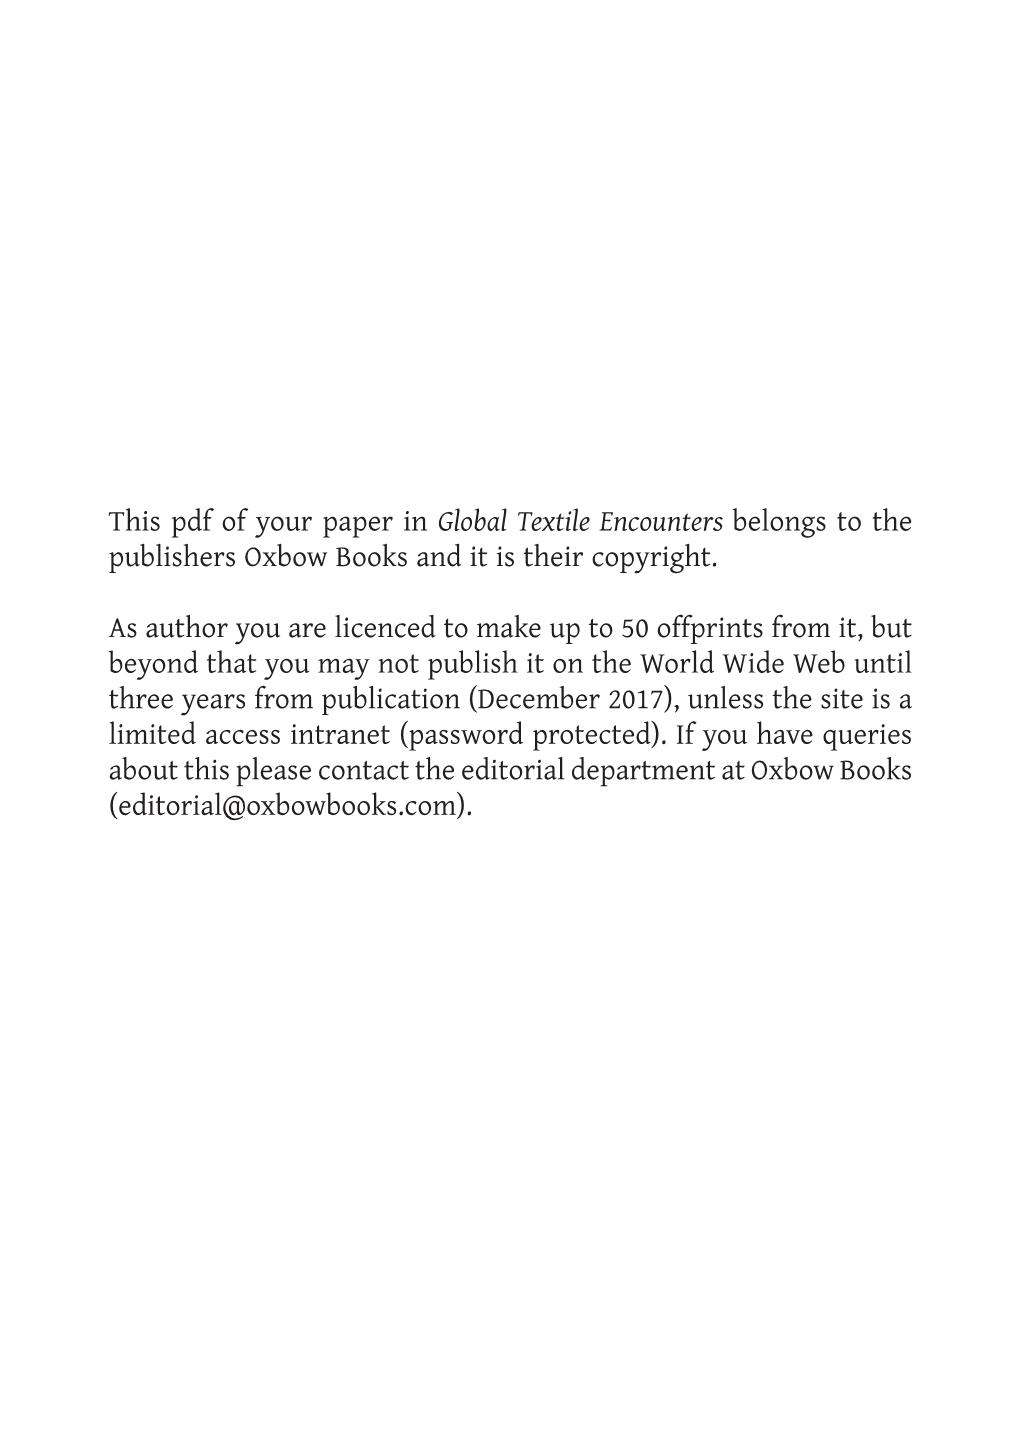 This Pdf of Your Paper in Global Textile Encounters Belongs to the Publishers Oxbow Books and It Is Their Copyright